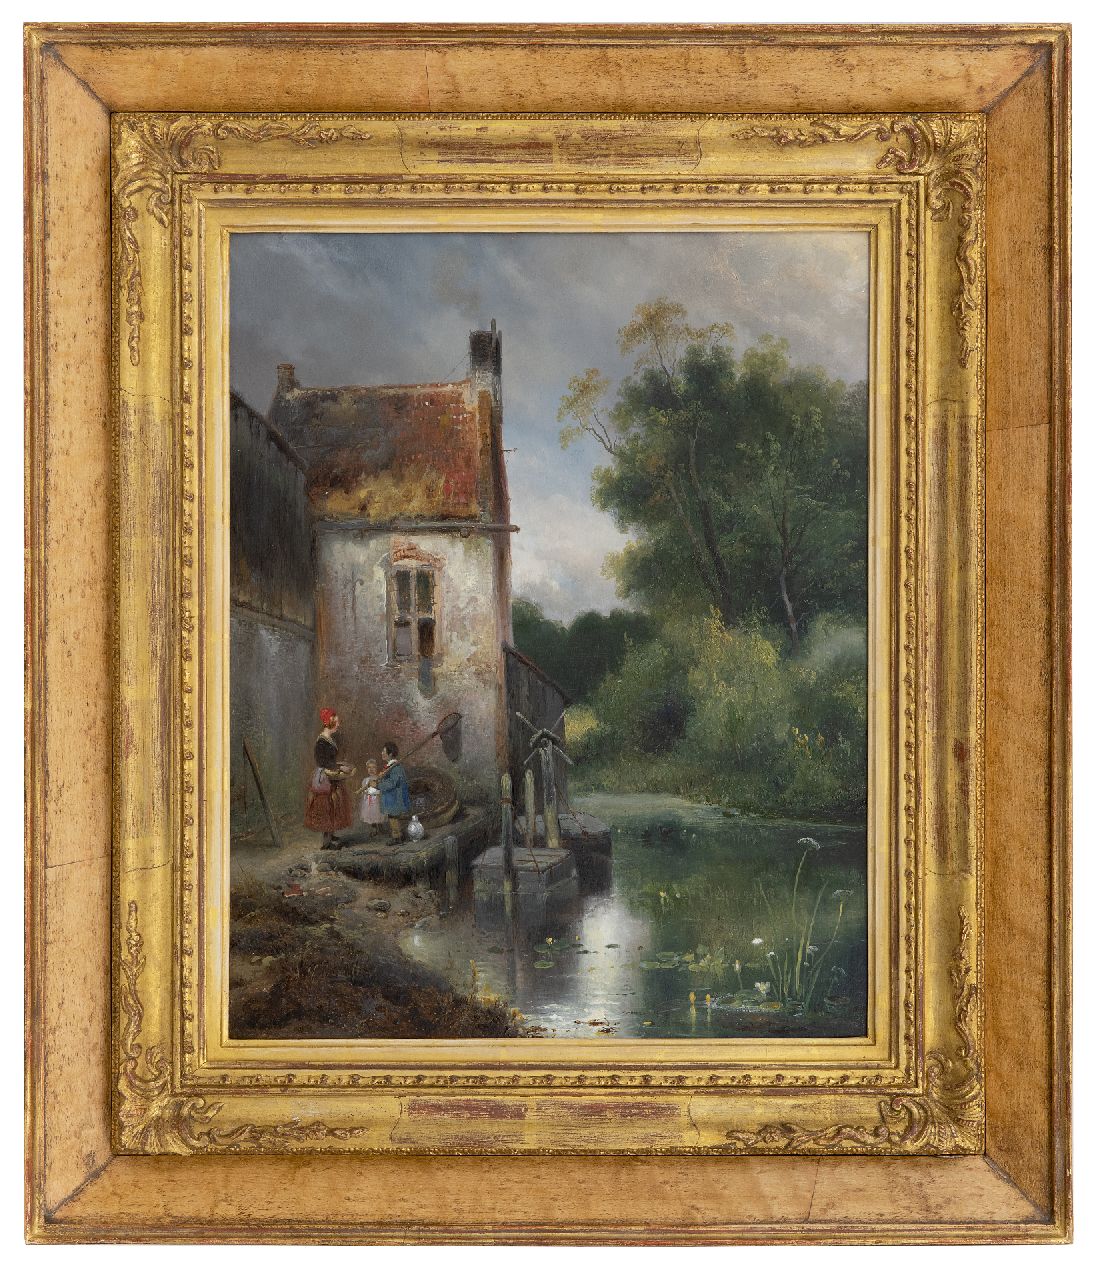 Nuijen W.J.J.  | Wijnandus Johannes Josephus 'Wijnand' Nuijen | Paintings offered for sale | Women and children near a house, oil on panel 41.9 x 33.1 cm, signed l.r. and dated 1834